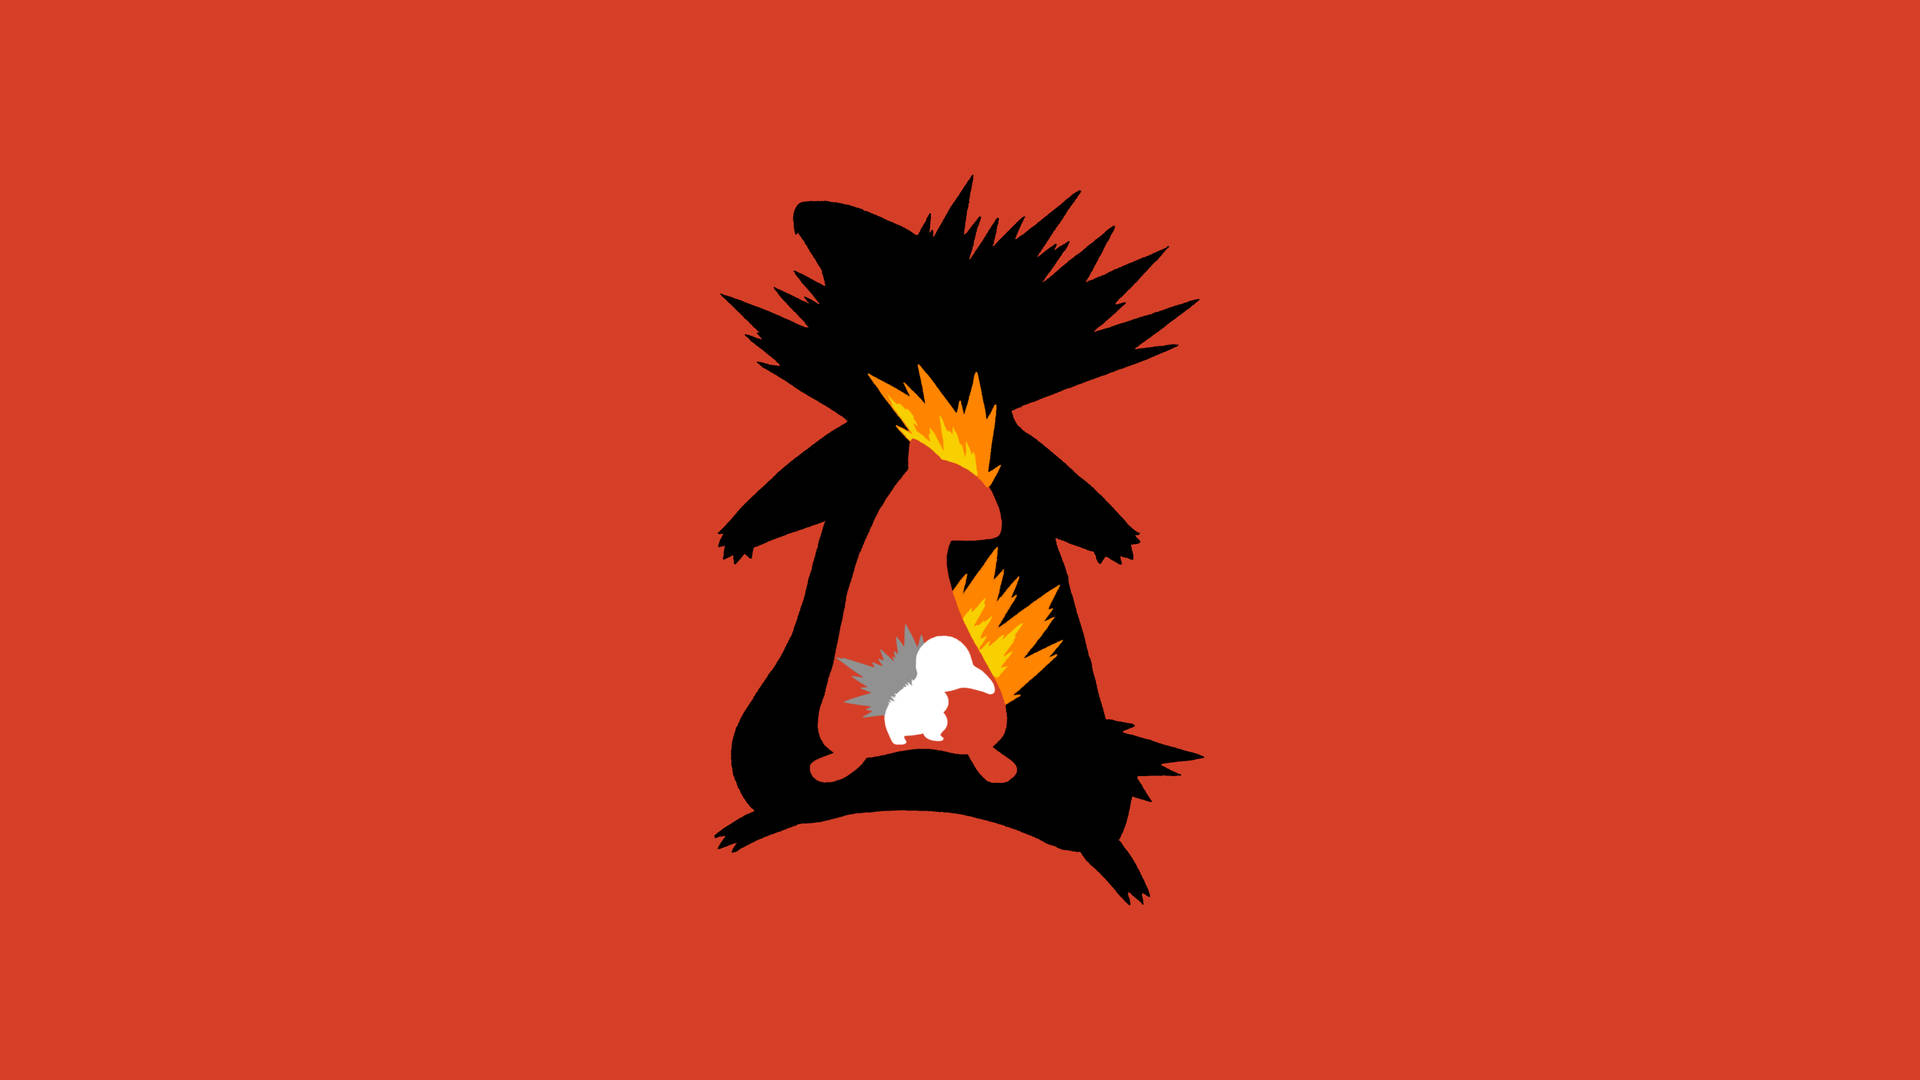 Shapes Forming Cyndaquil Wallpaper